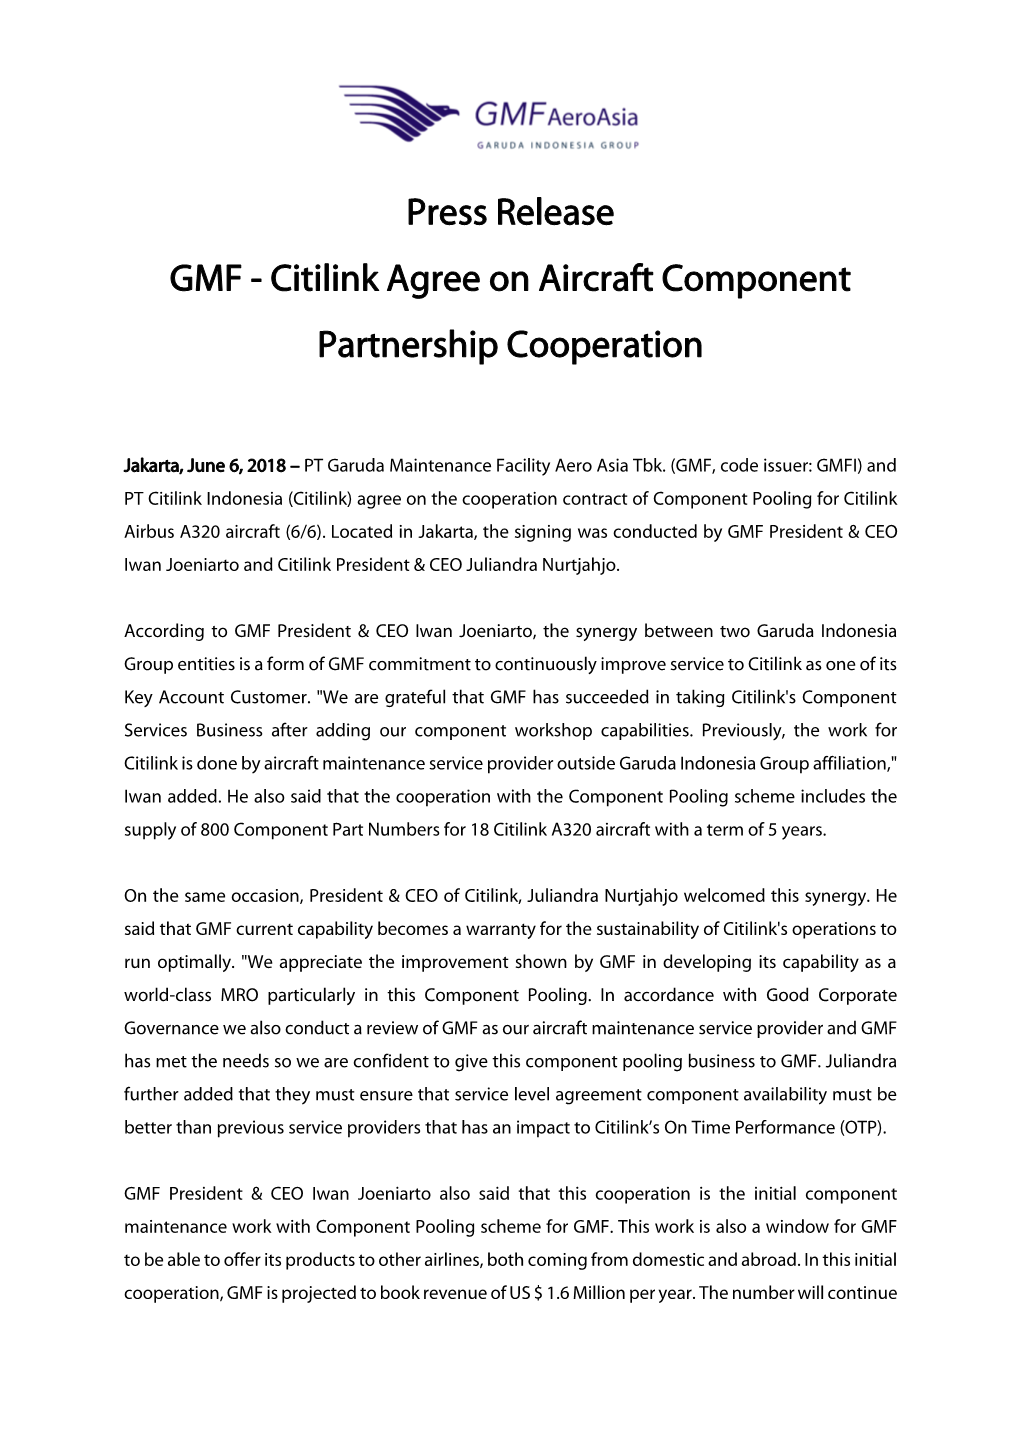 Press Release GMF - Citilink Agree on Aircraft Component Partnership Cooperation